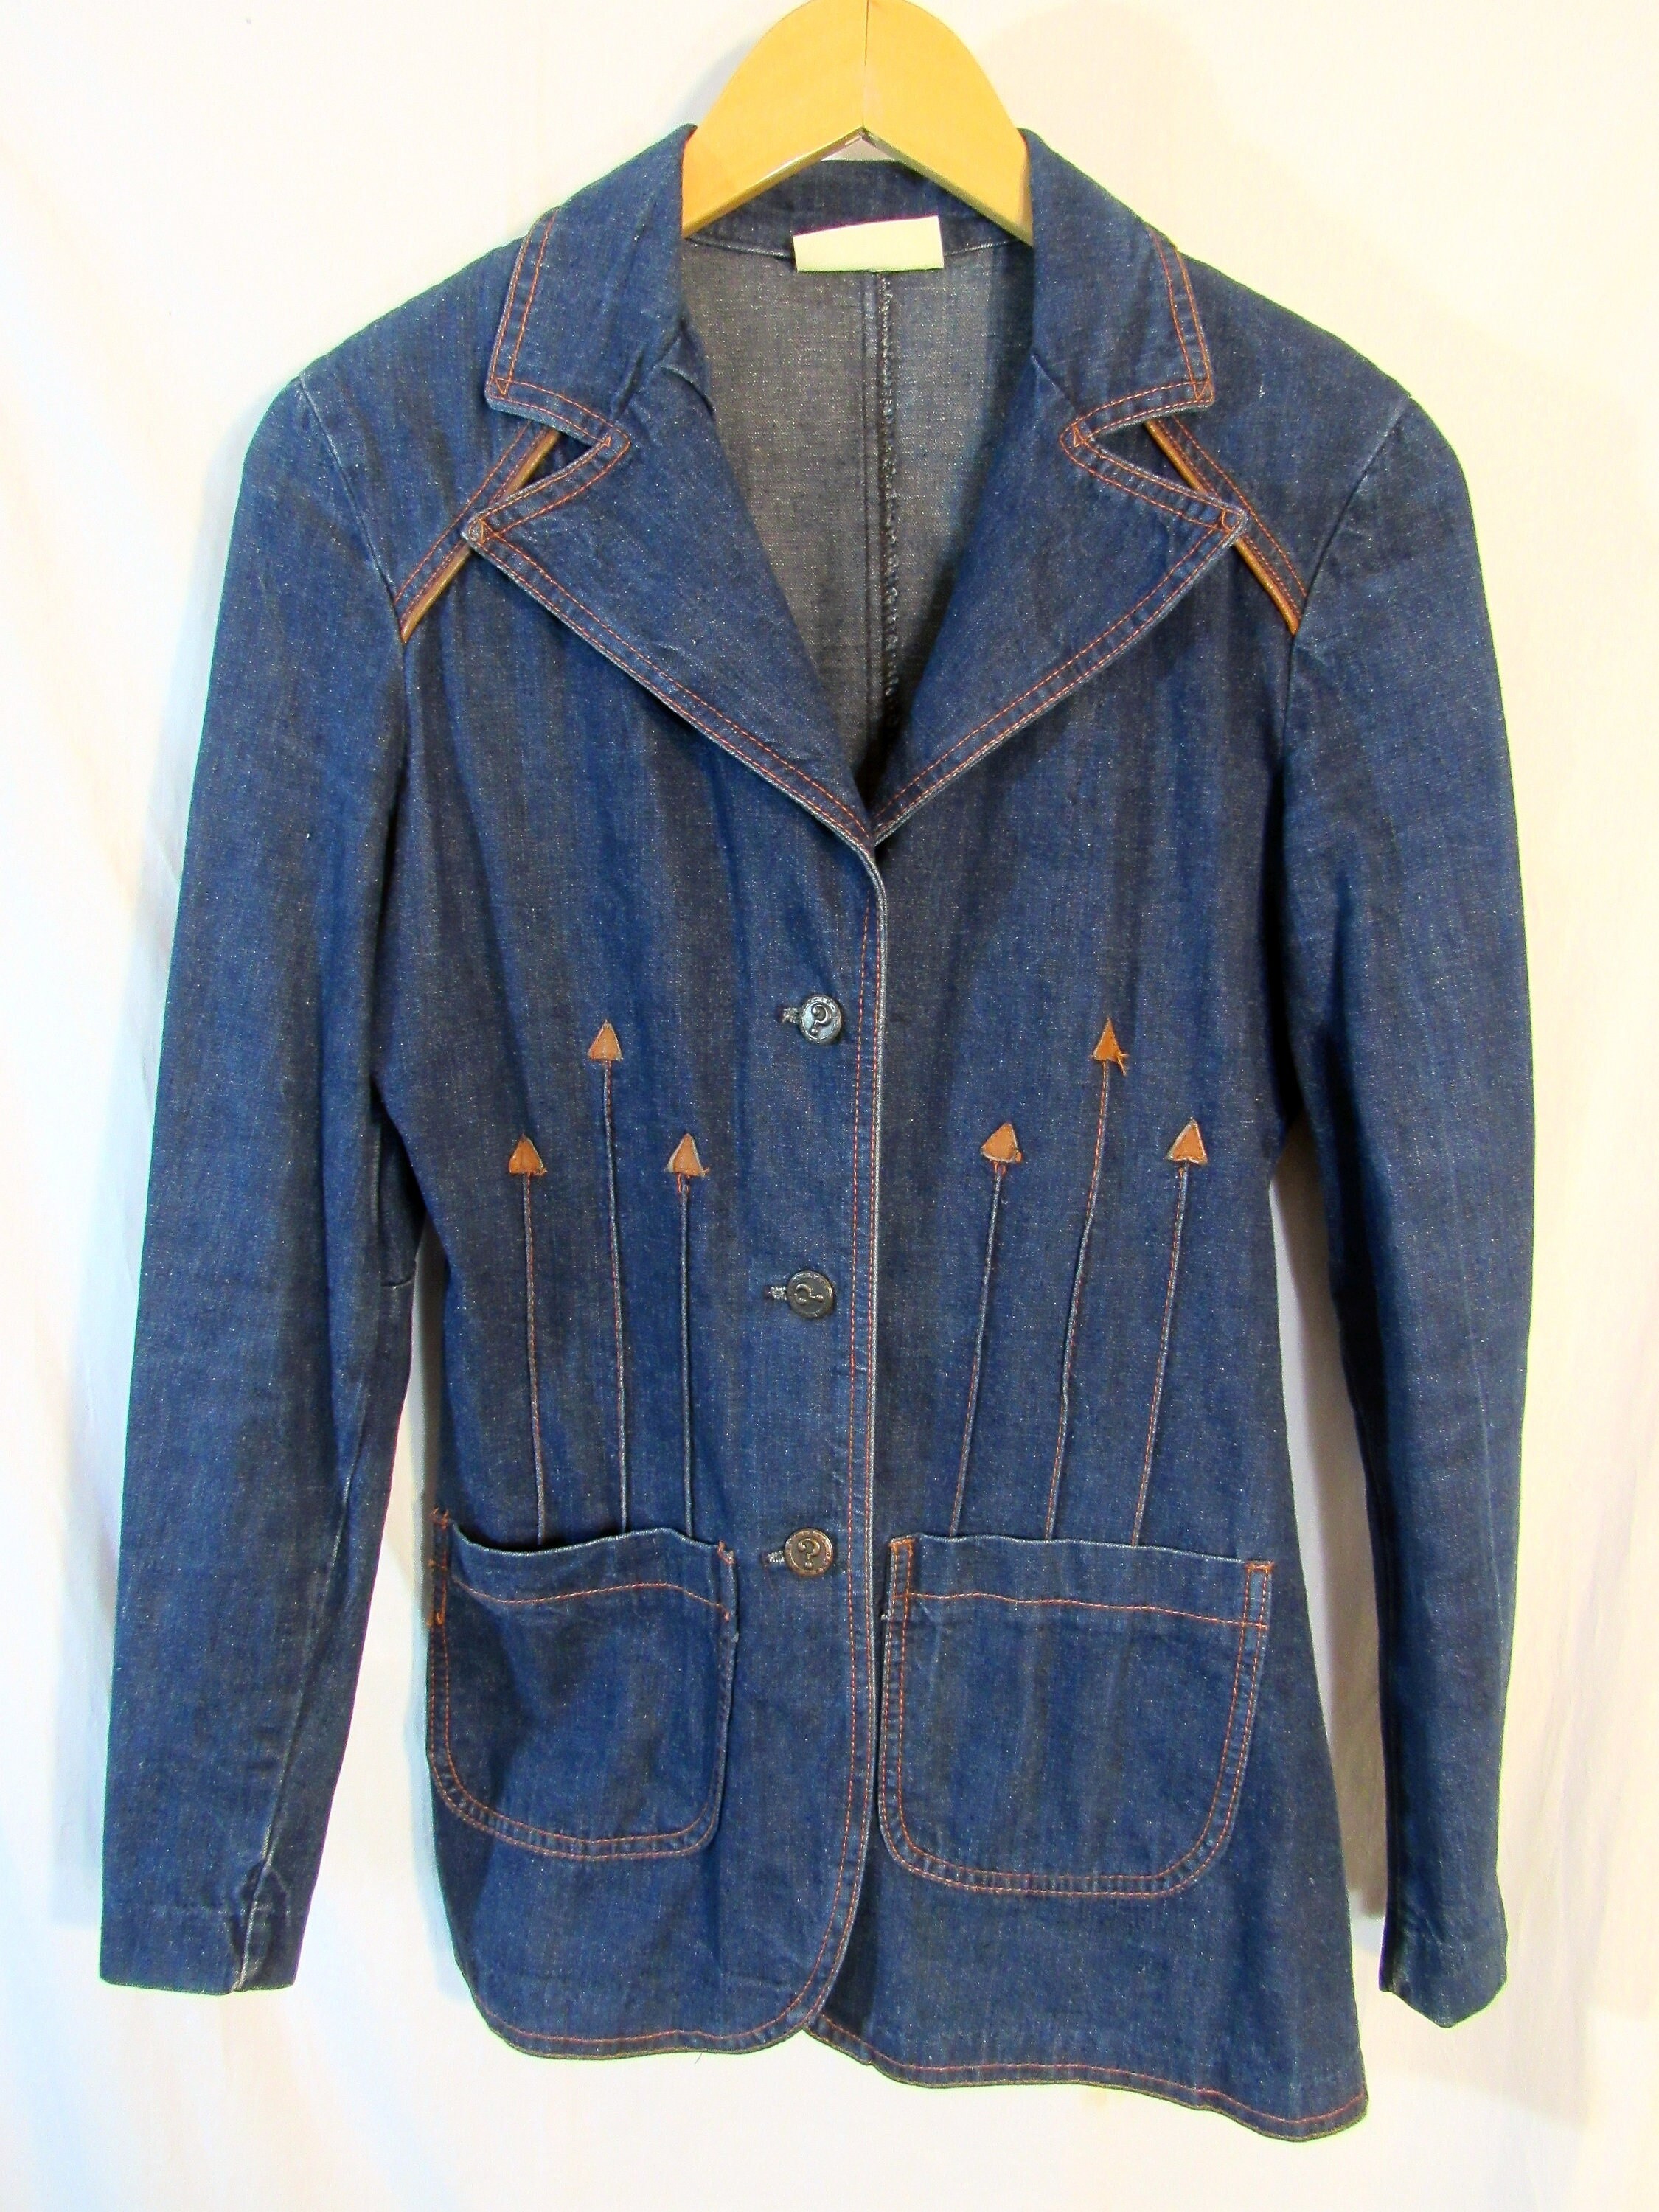 WHAT'S-IN-A-NAME Vintage Women's Western Blue Denim Jacket Bust 34 W/  Orange Stitching & Leather Trim 1970's Very Near Mint Condition - Etsy